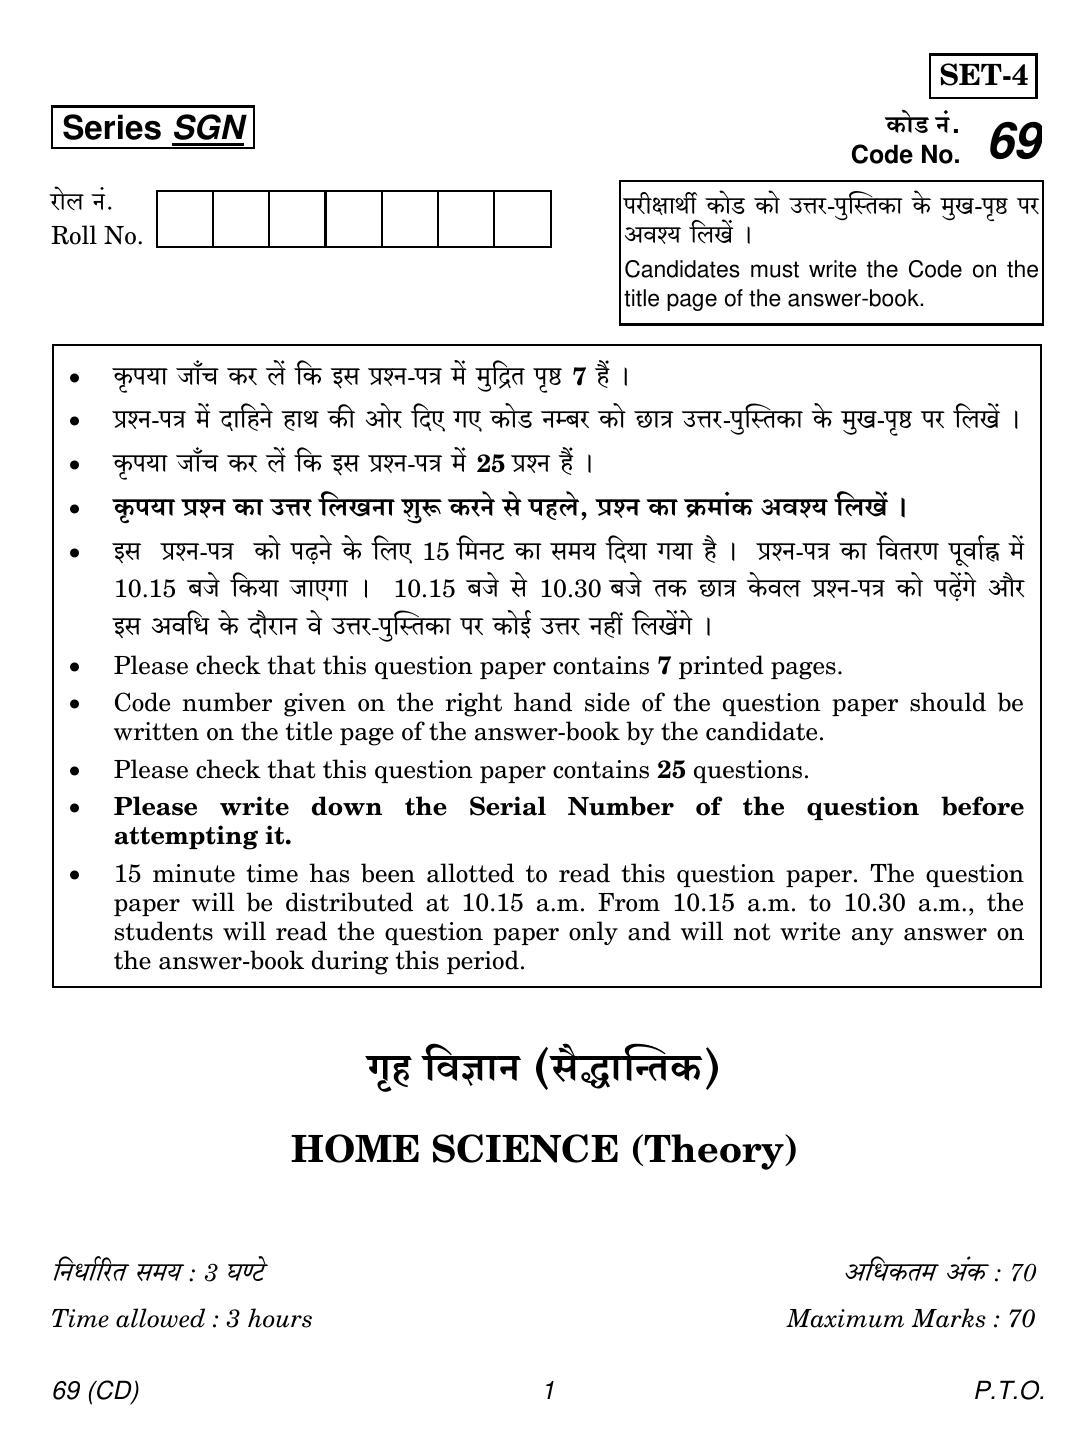 CBSE Class 12 69 HOME SCIENCE CD 2018 Question Paper - Page 1